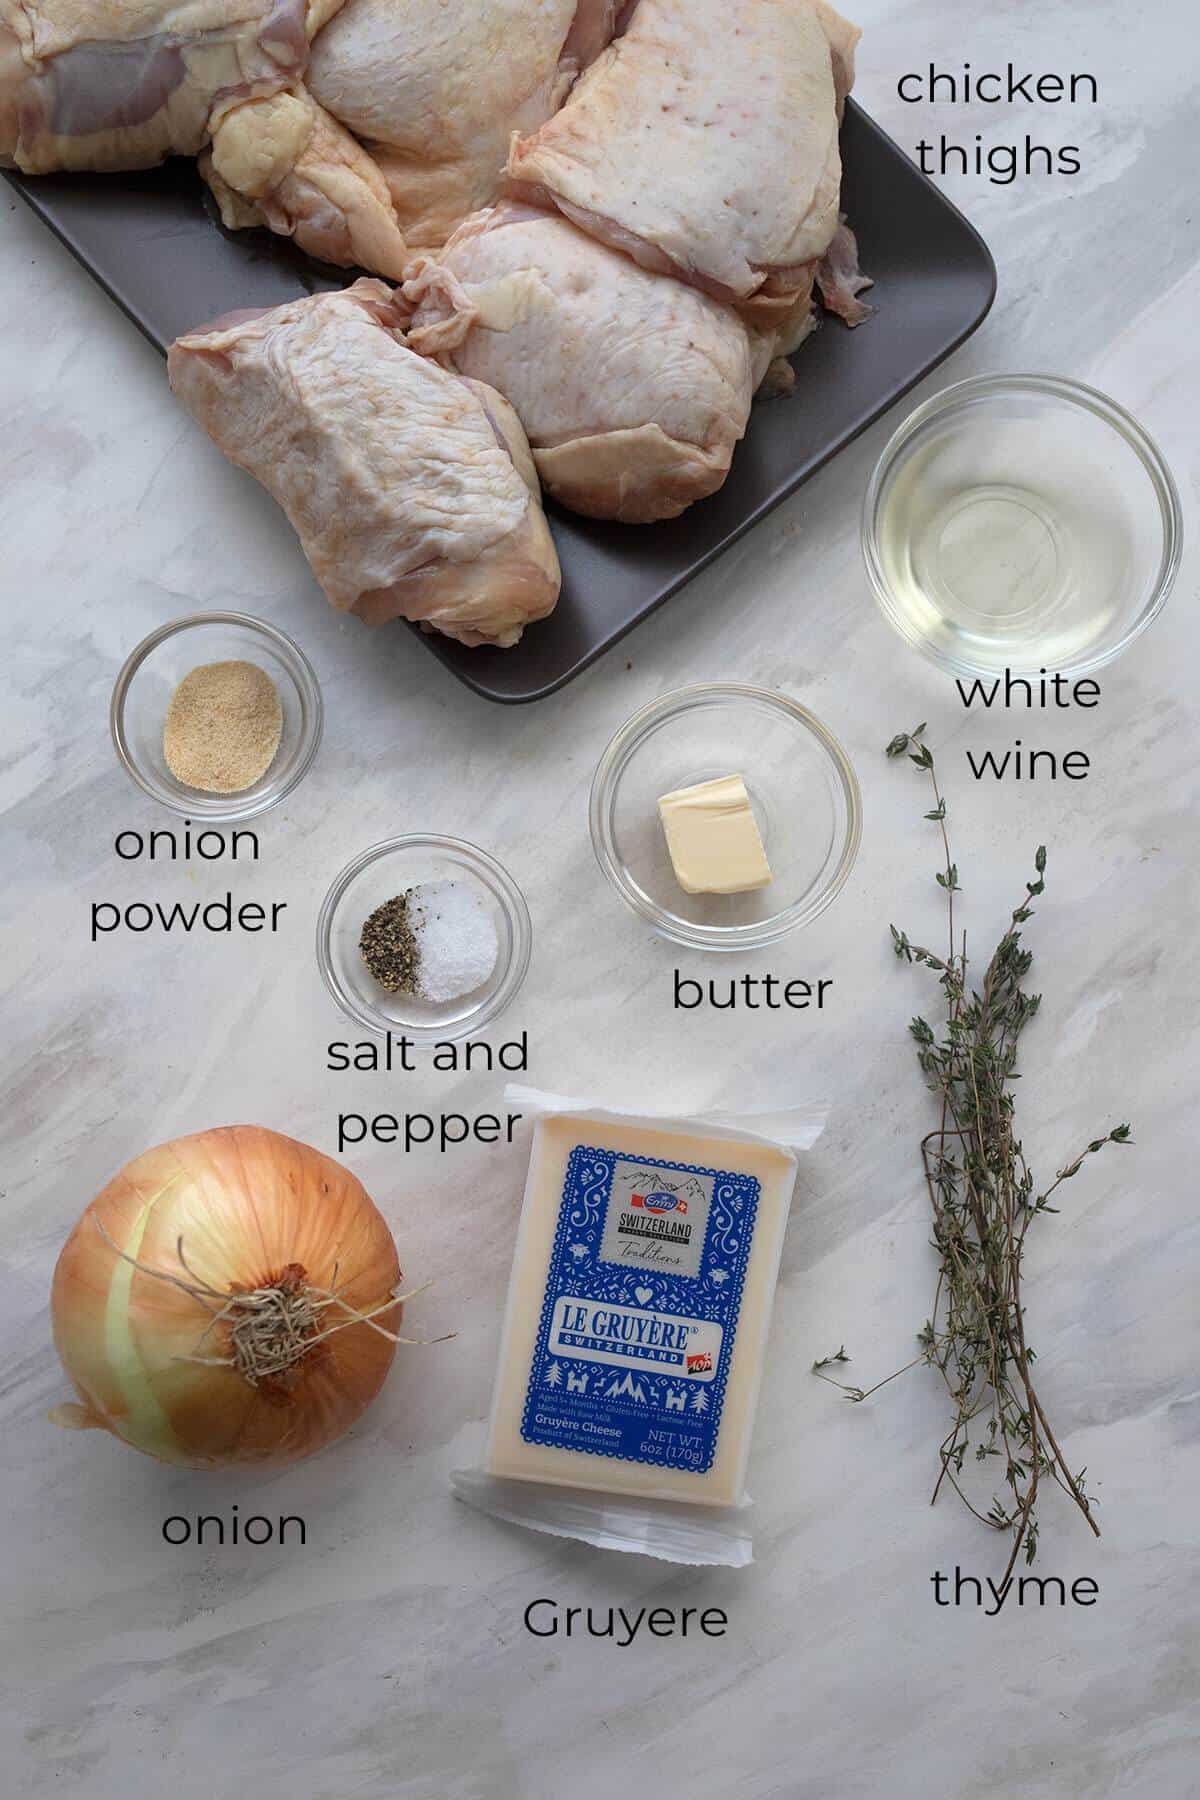 Top down image of ingredients needed for French Onion Chicken.